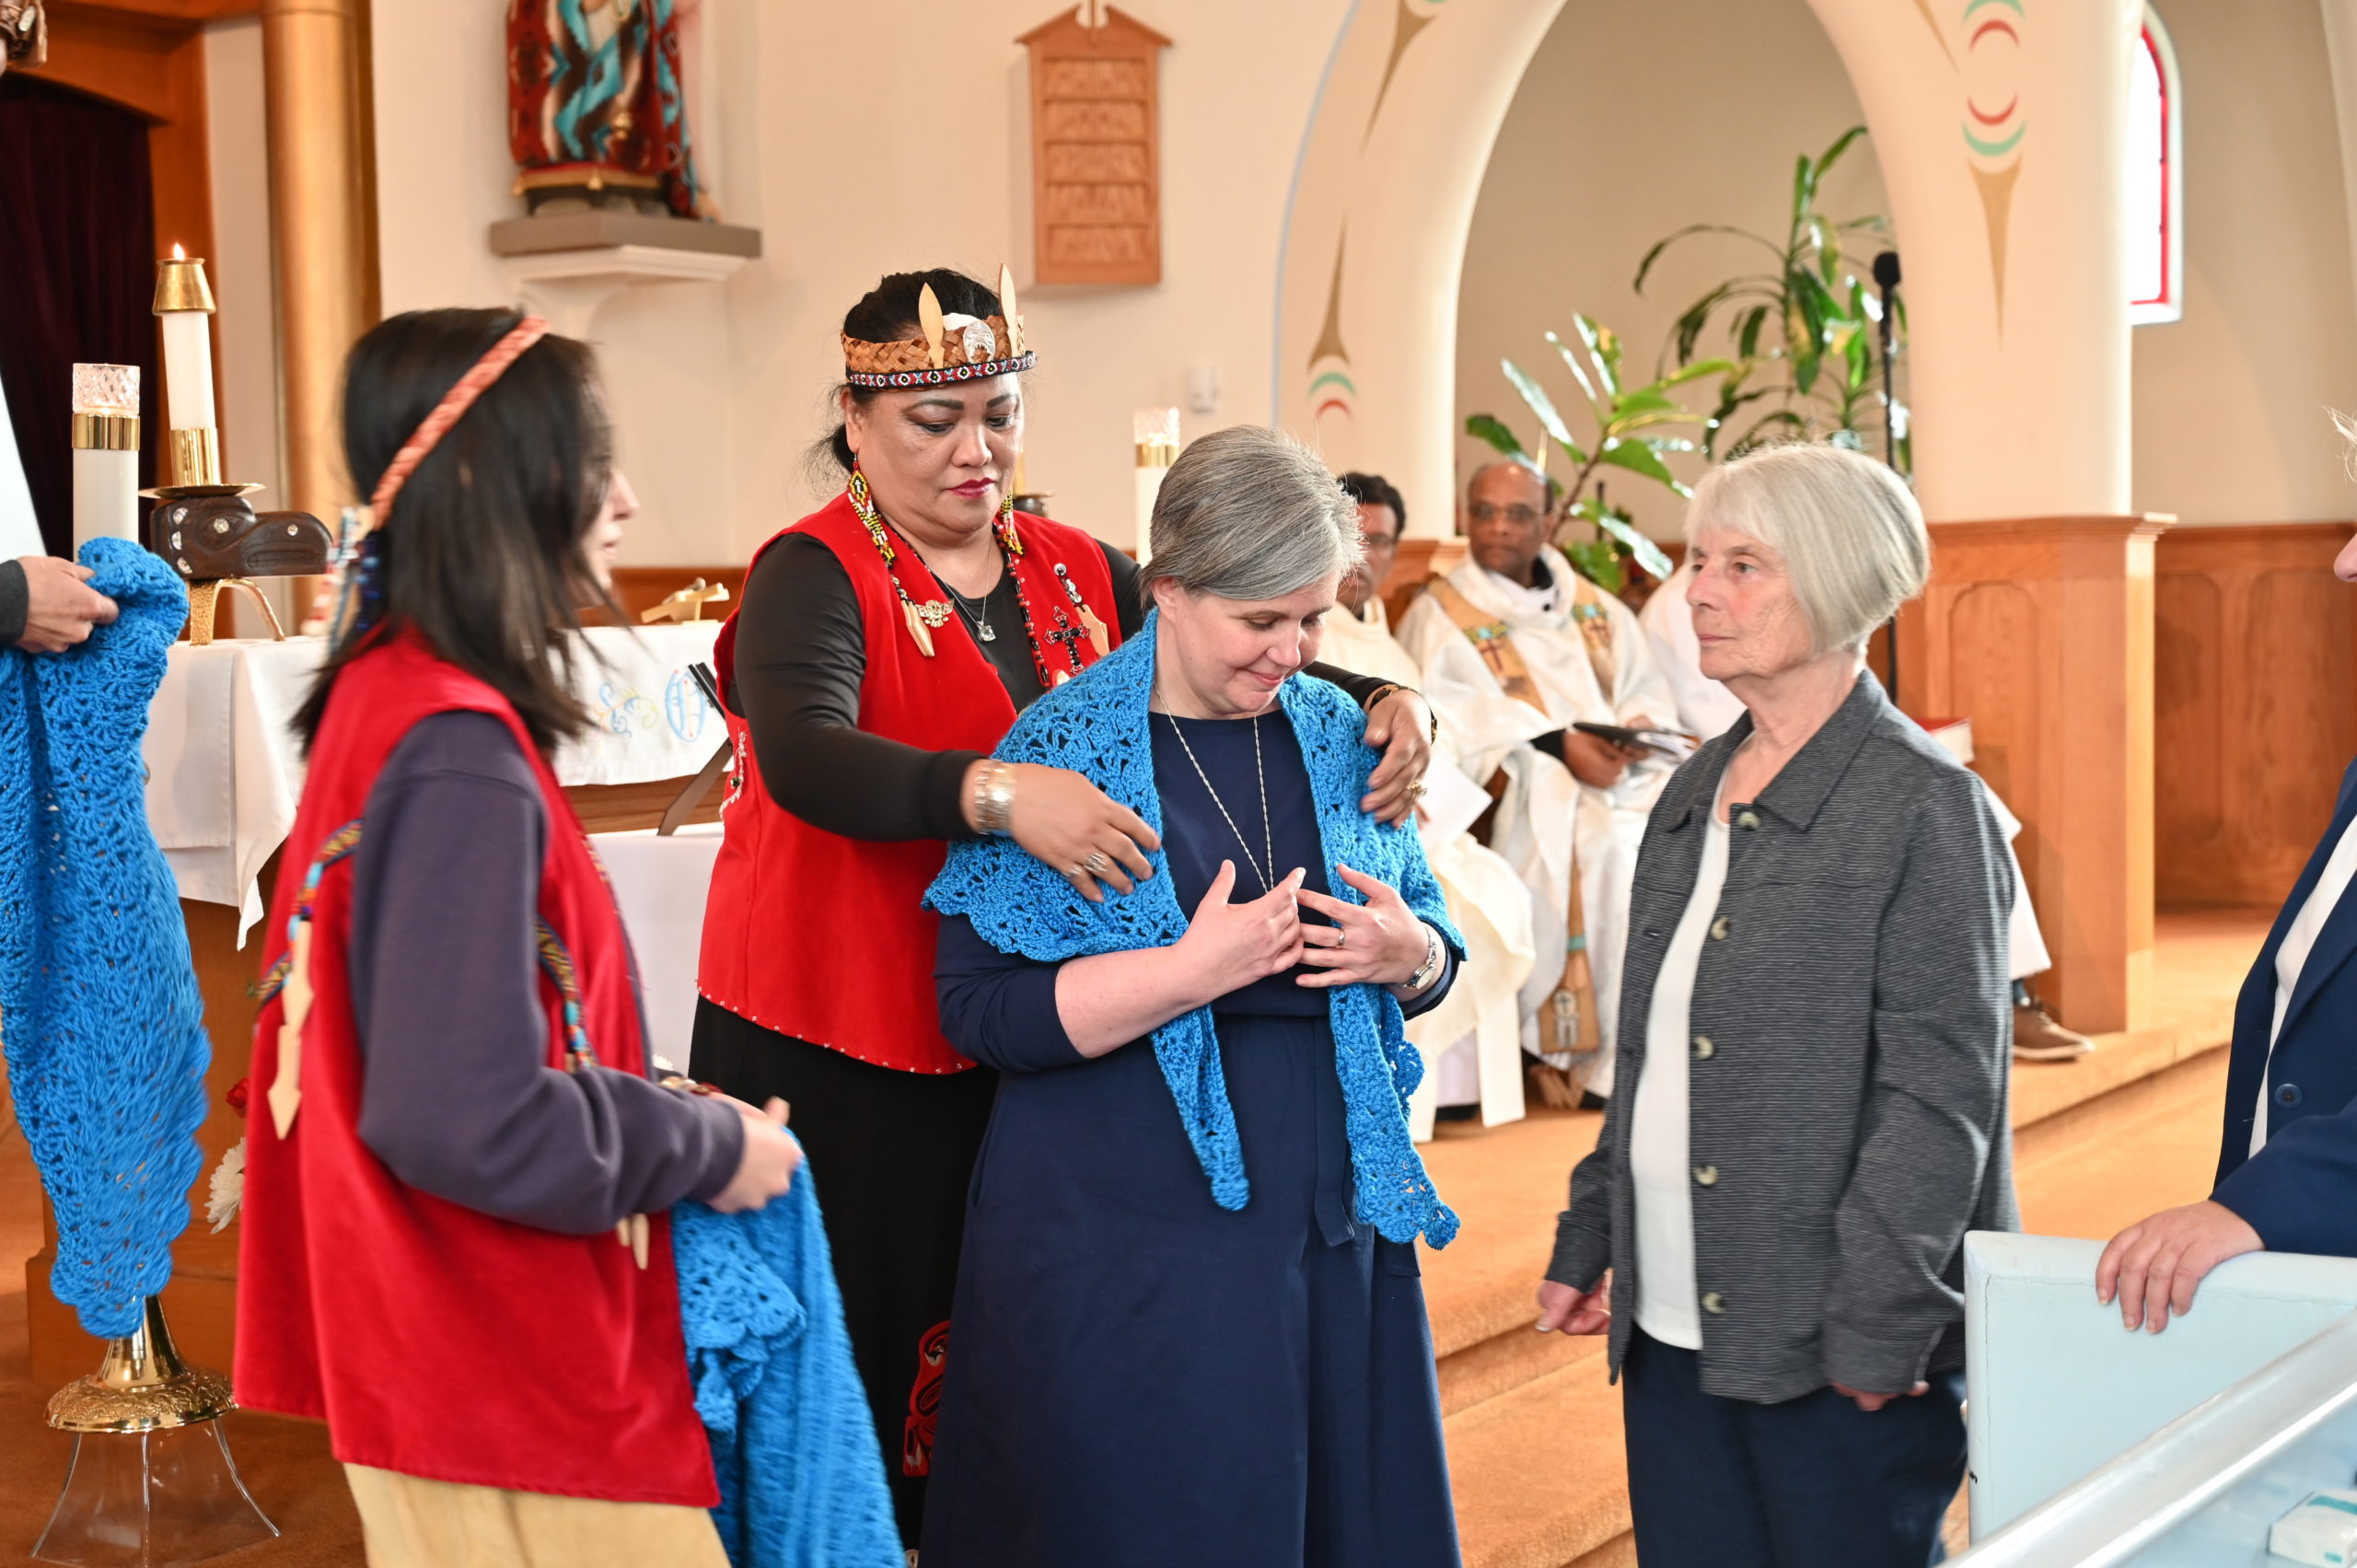 The First Religious Profession of Sister Heather Charest in North Vancouver, Canada, on March 25th.